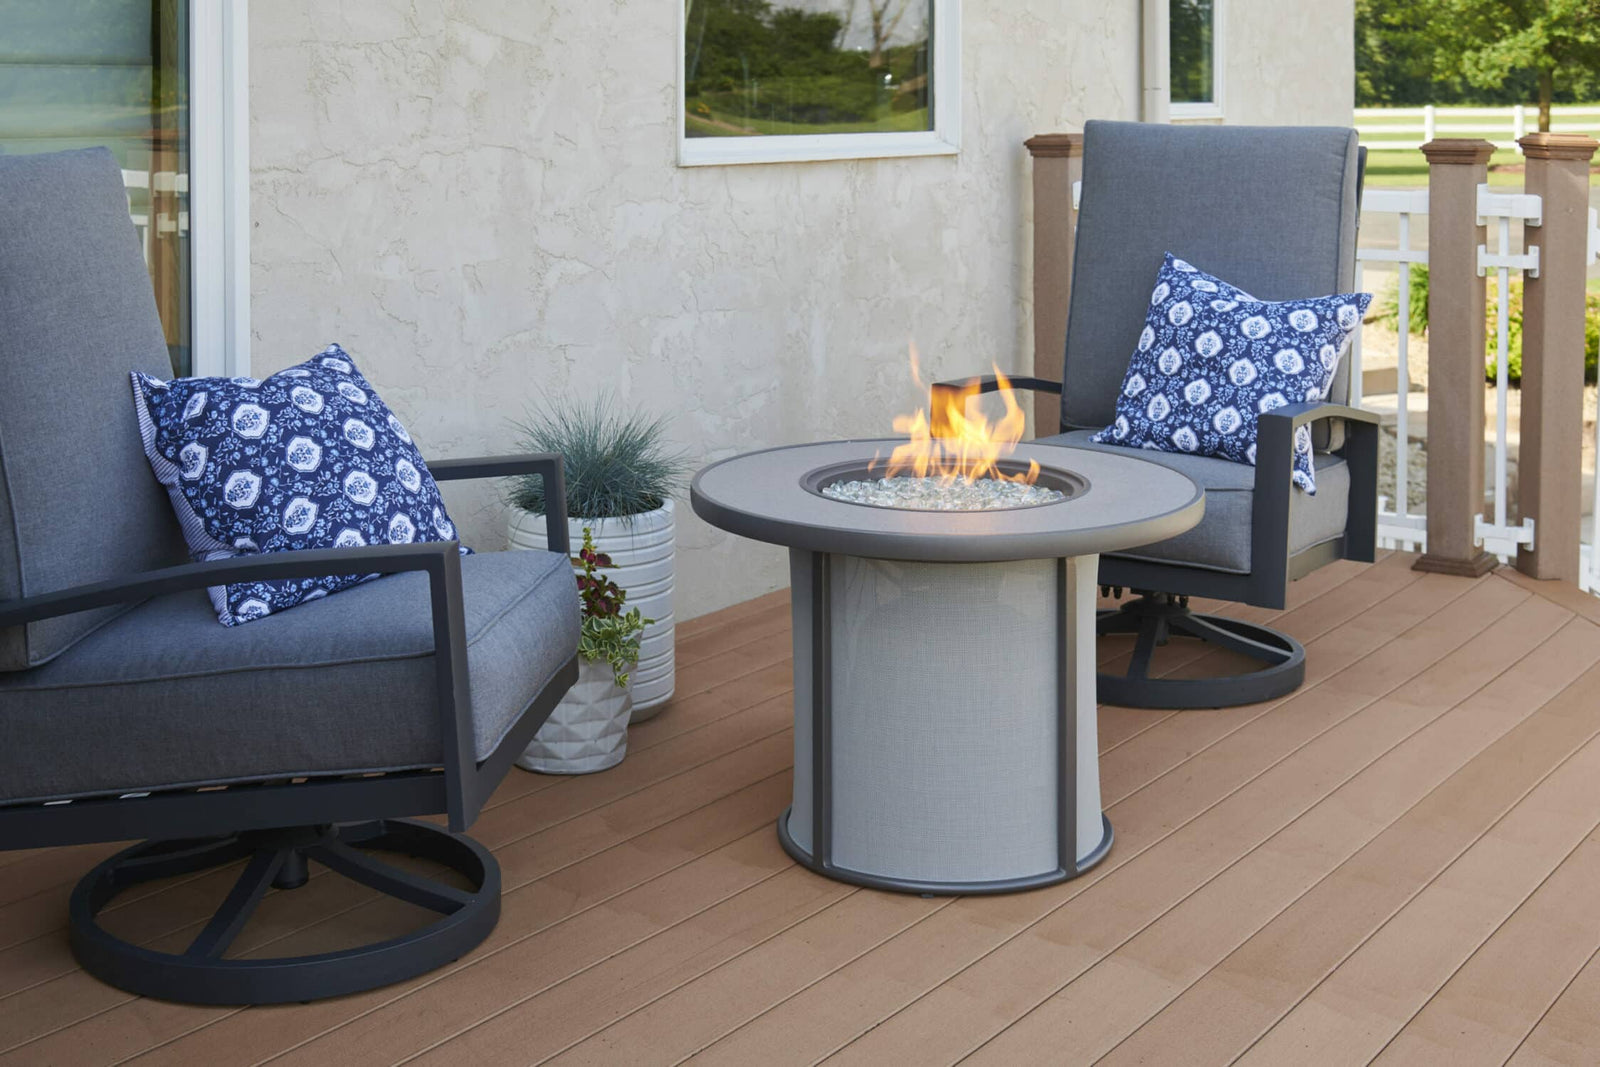 8 Fire Pits Perfect for Any Backyard Theme